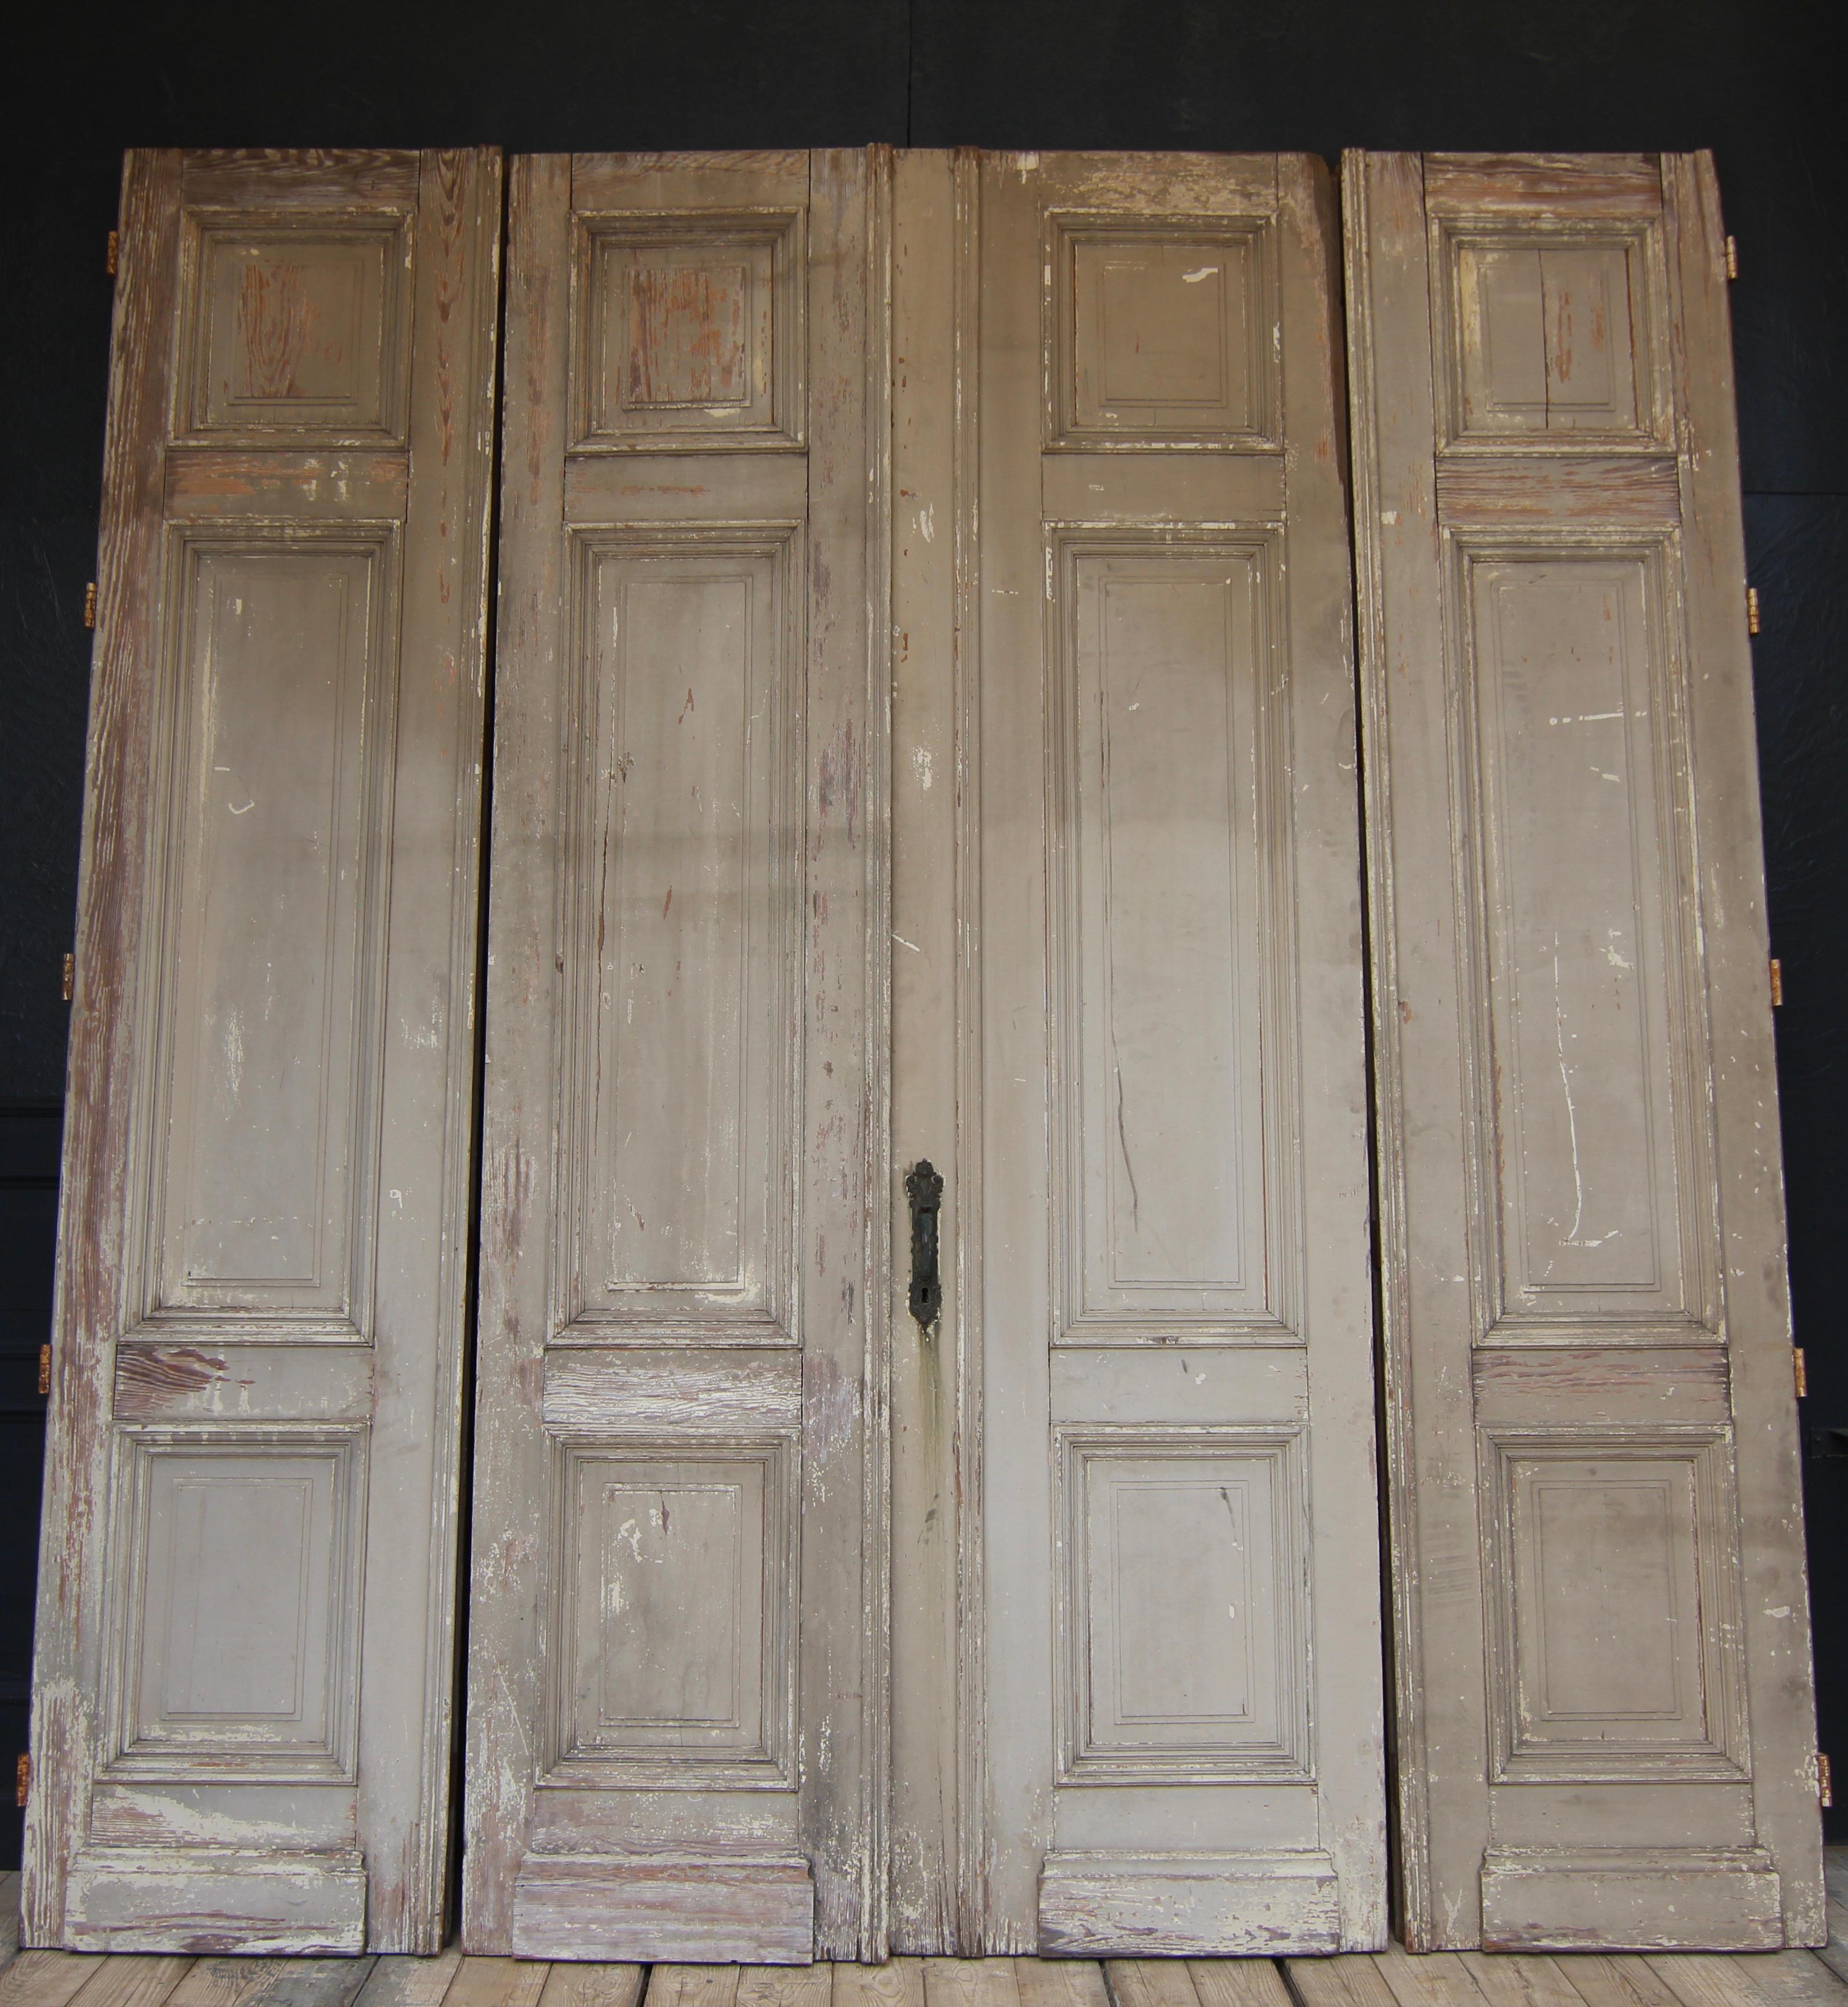 two sets of french doors side by side